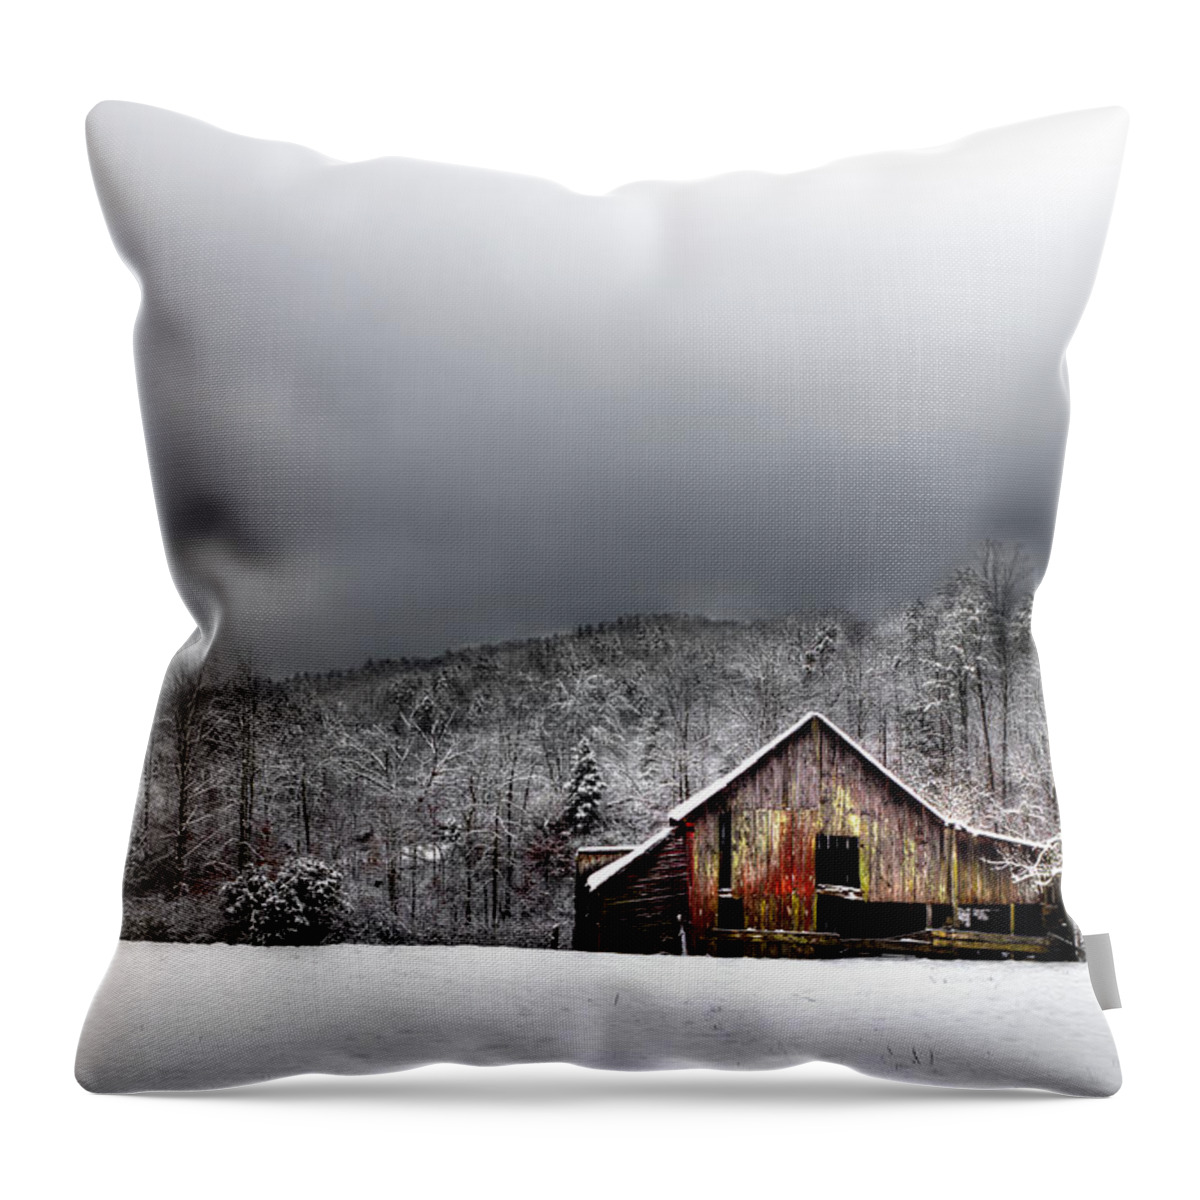 Barn Throw Pillow featuring the photograph Country Barn In The Smokies by Mike Eingle